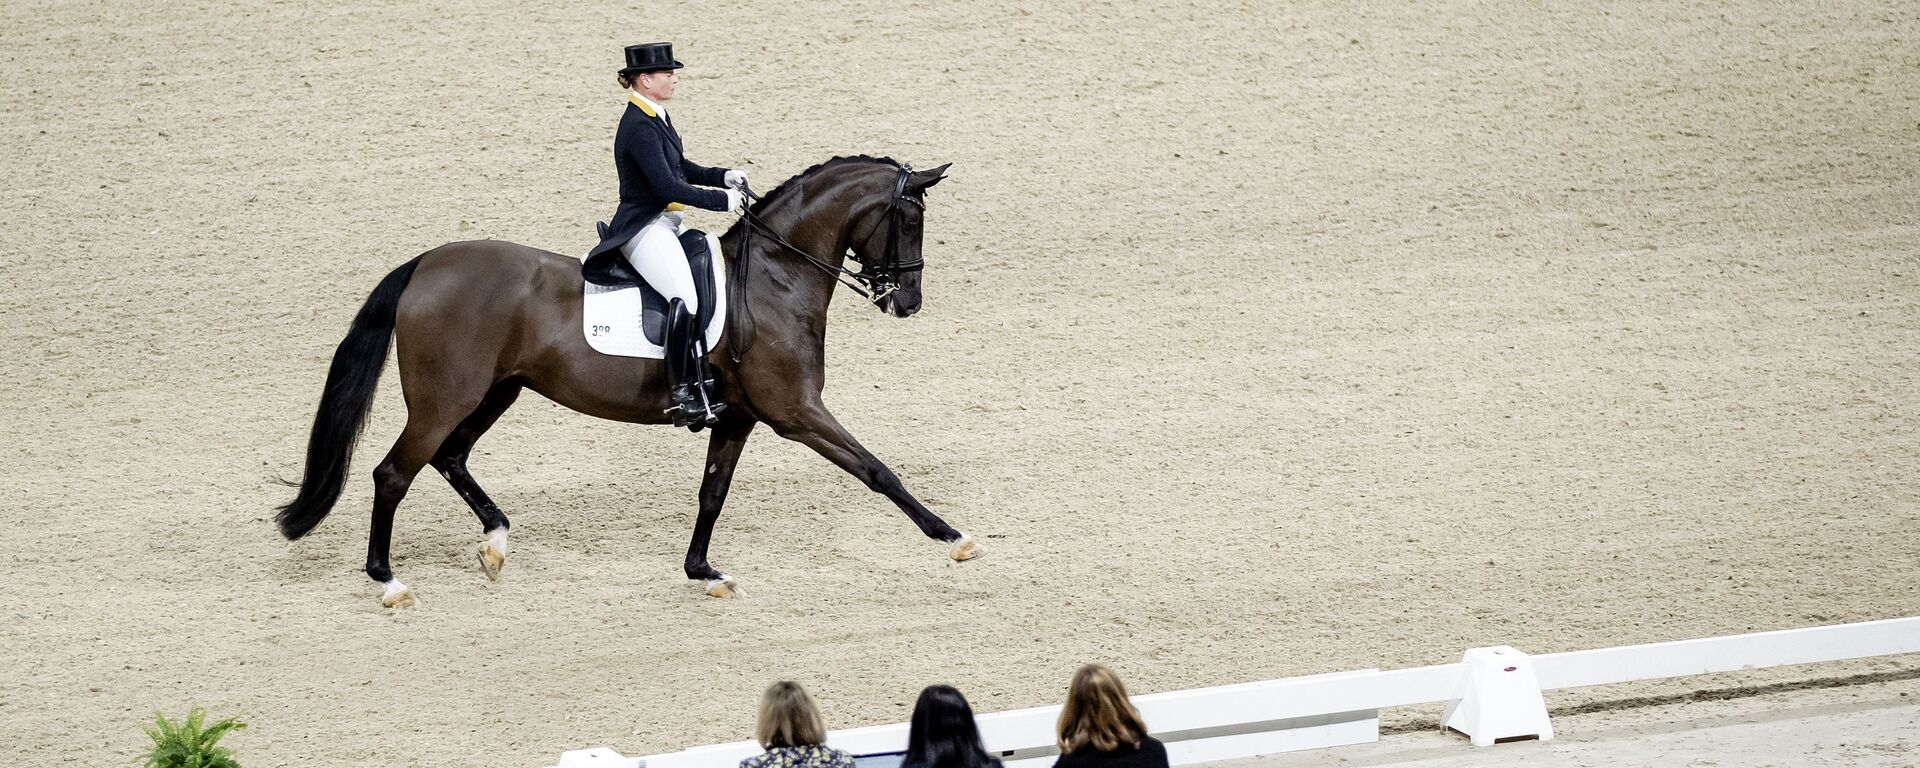 German equestrian Isabell Werth competes during the FEI Dressage World Cup at Jumping Amsterdam in the RAI on 24 January 2020 - Sputnik International, 1920, 14.02.2020